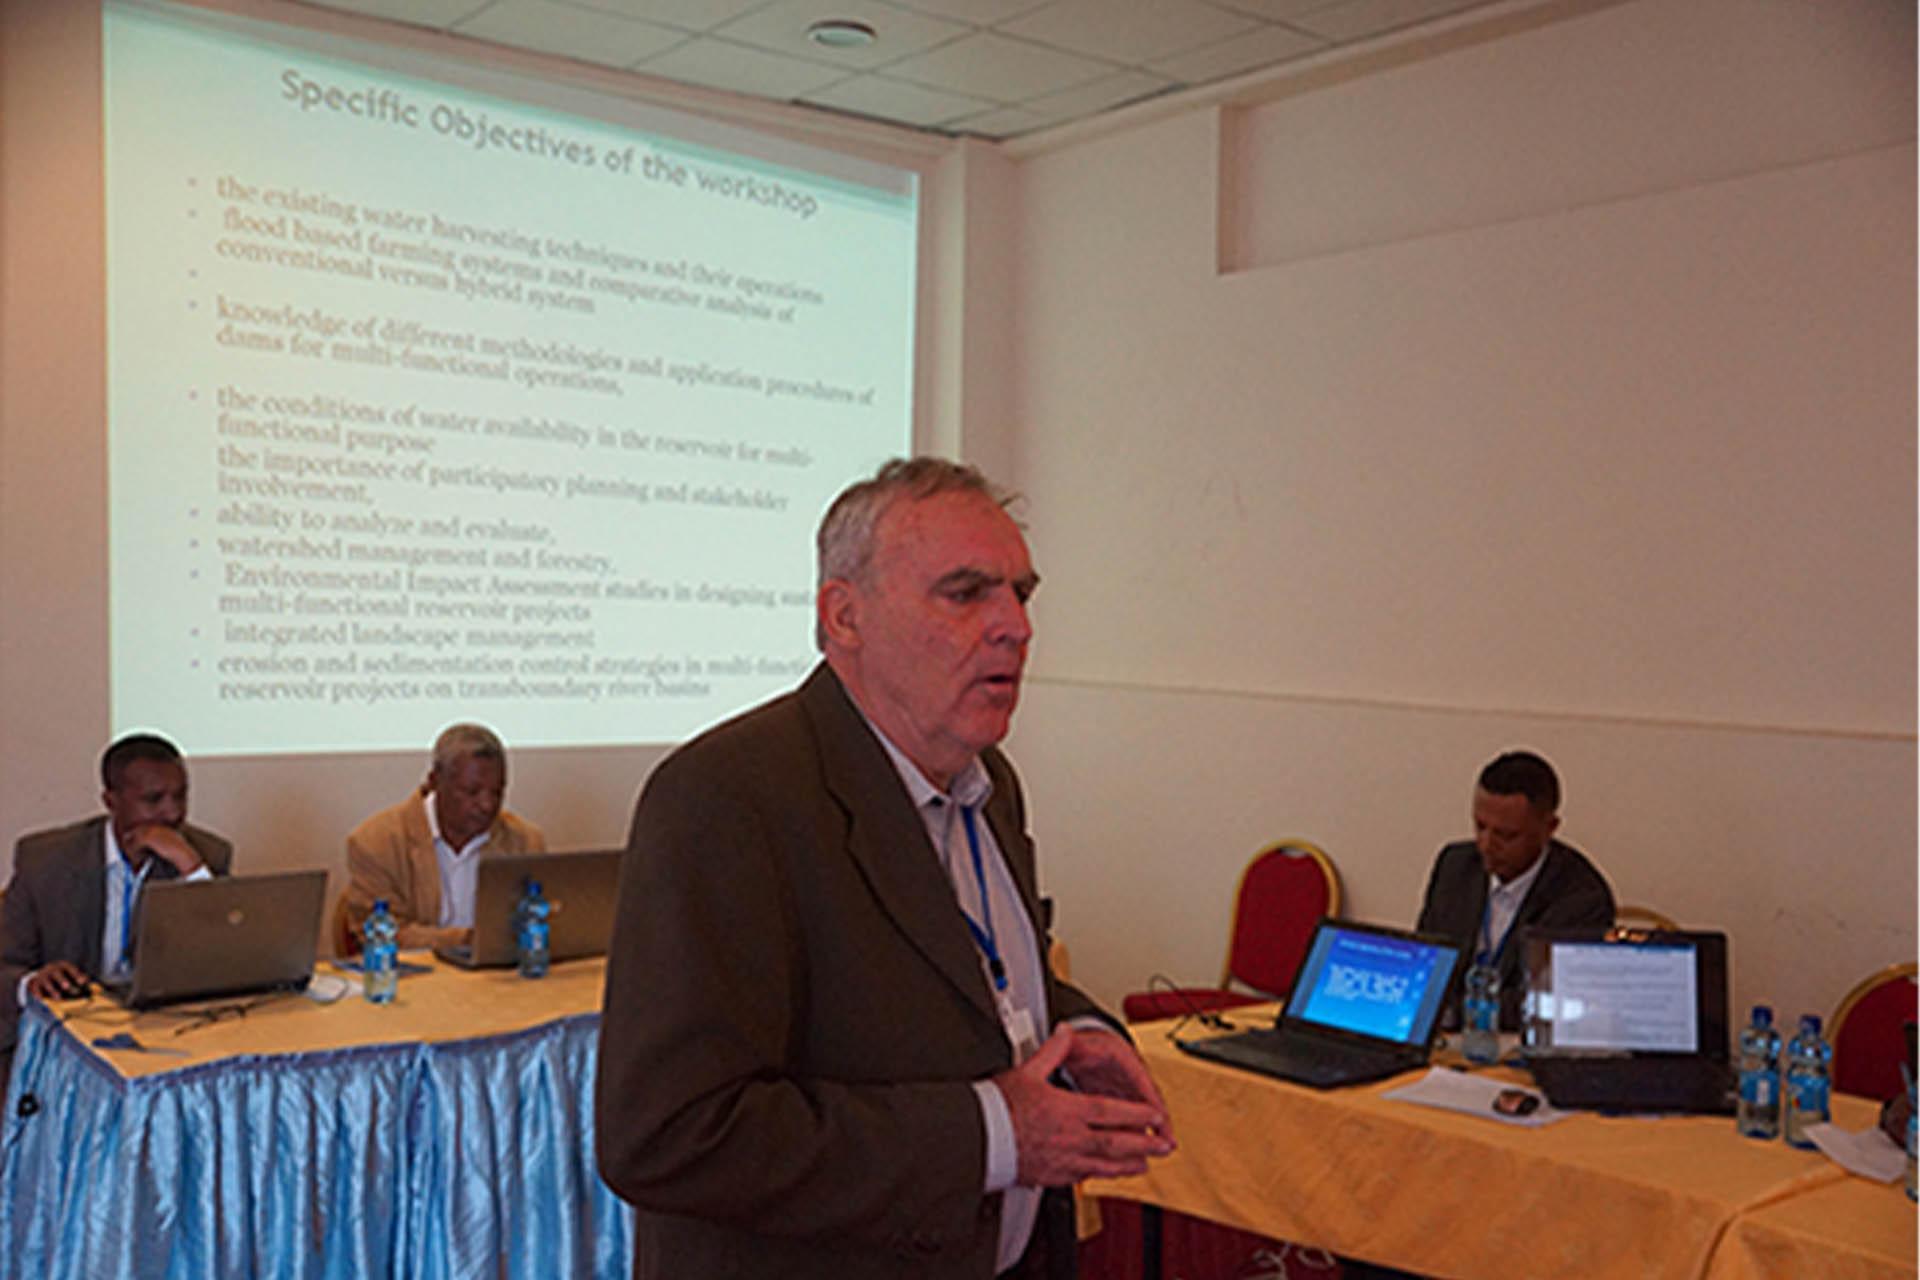 IGAD Closes its Water Resources Management Programme with a Key Regional Training in Addis Ababa